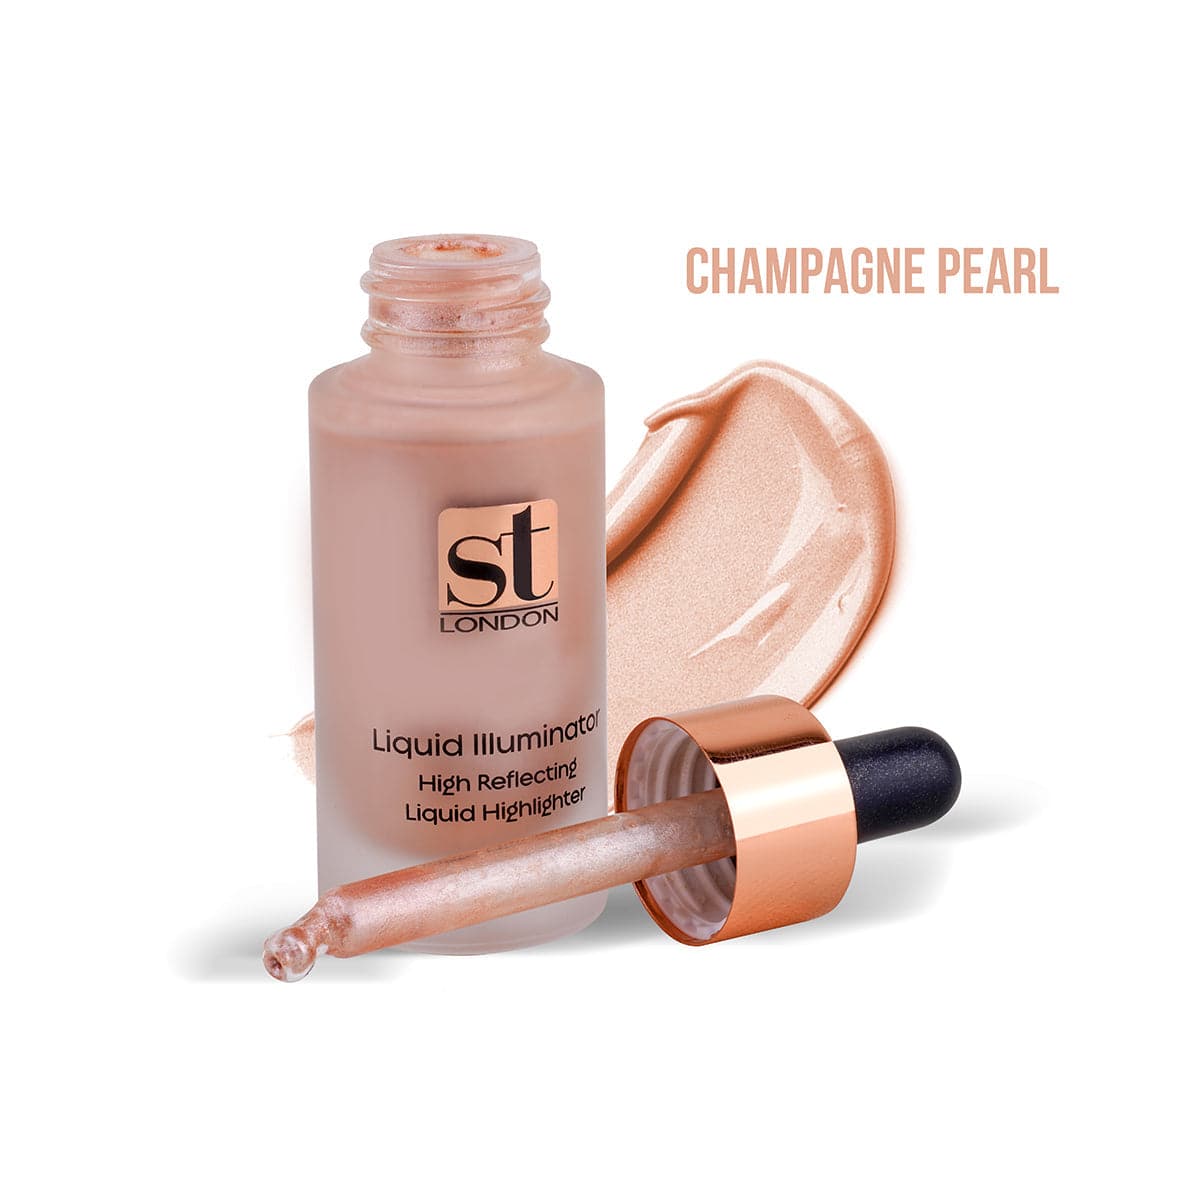 ST London Liquid Illuminator Highlighter Champagne Pearl - Premium Health & Beauty from St London - Just Rs 3250.00! Shop now at Cozmetica